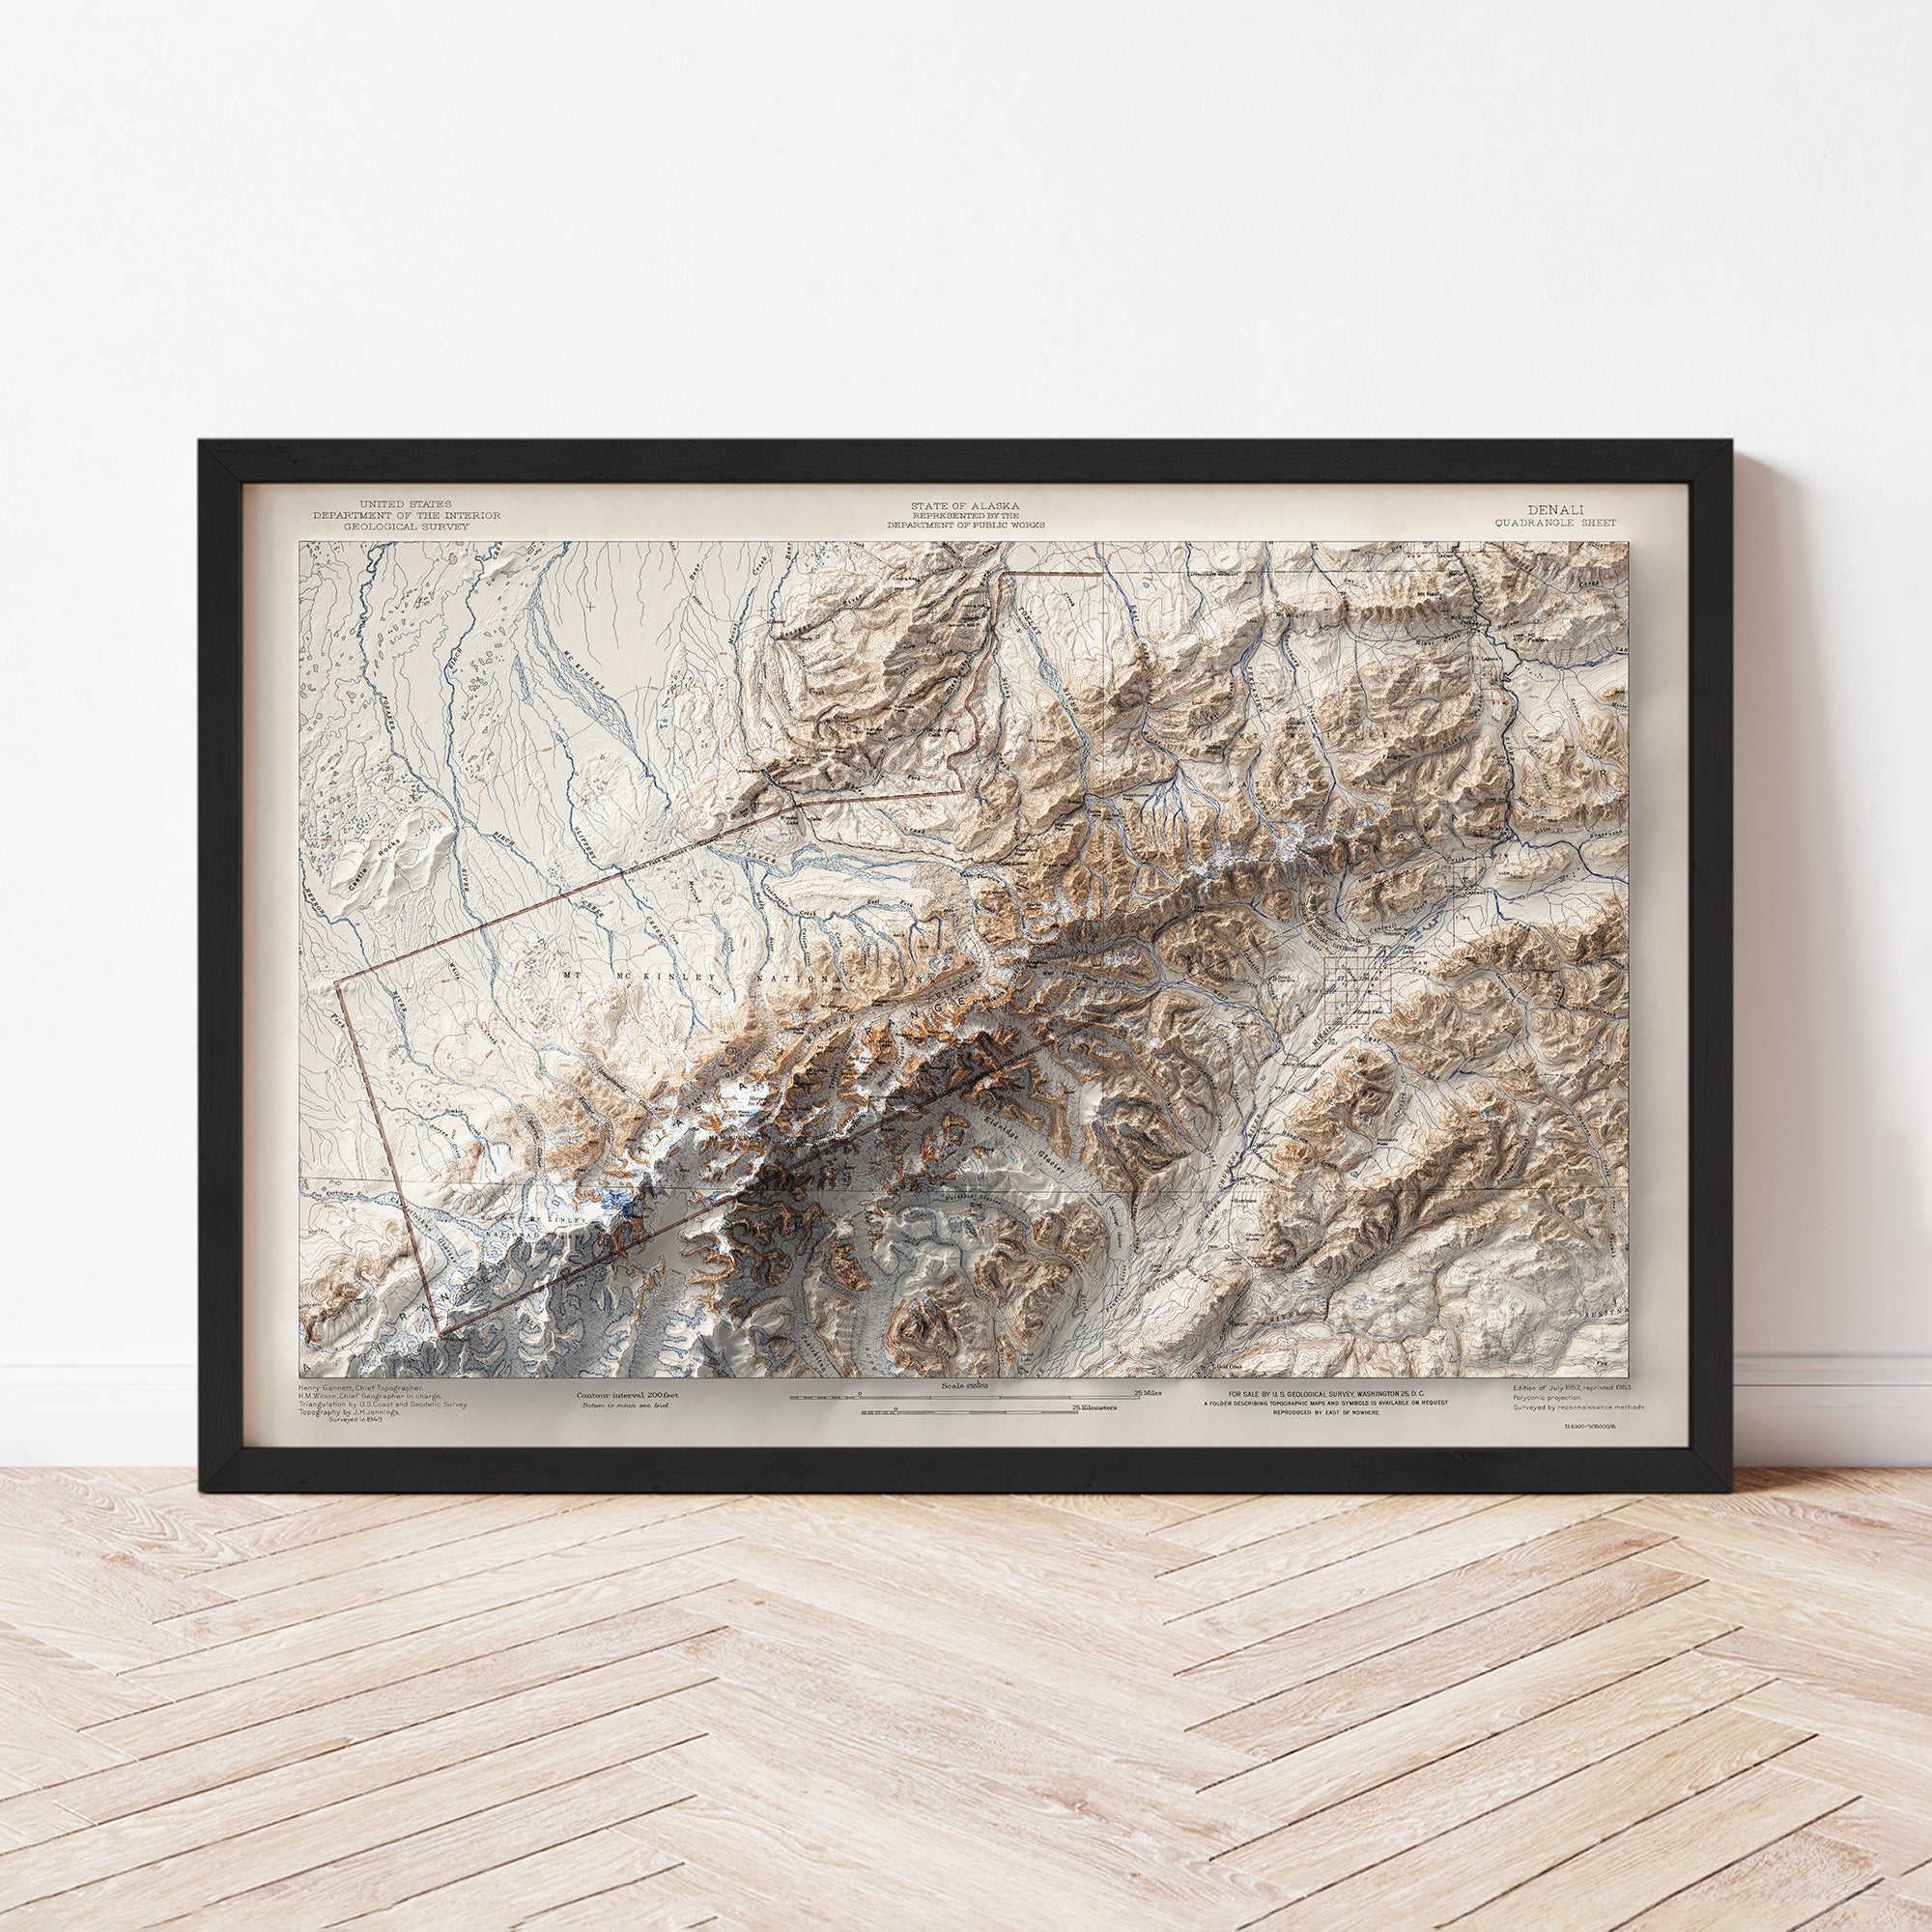 Denali National Park, AK - Vintage Shaded Relief Map (1952)